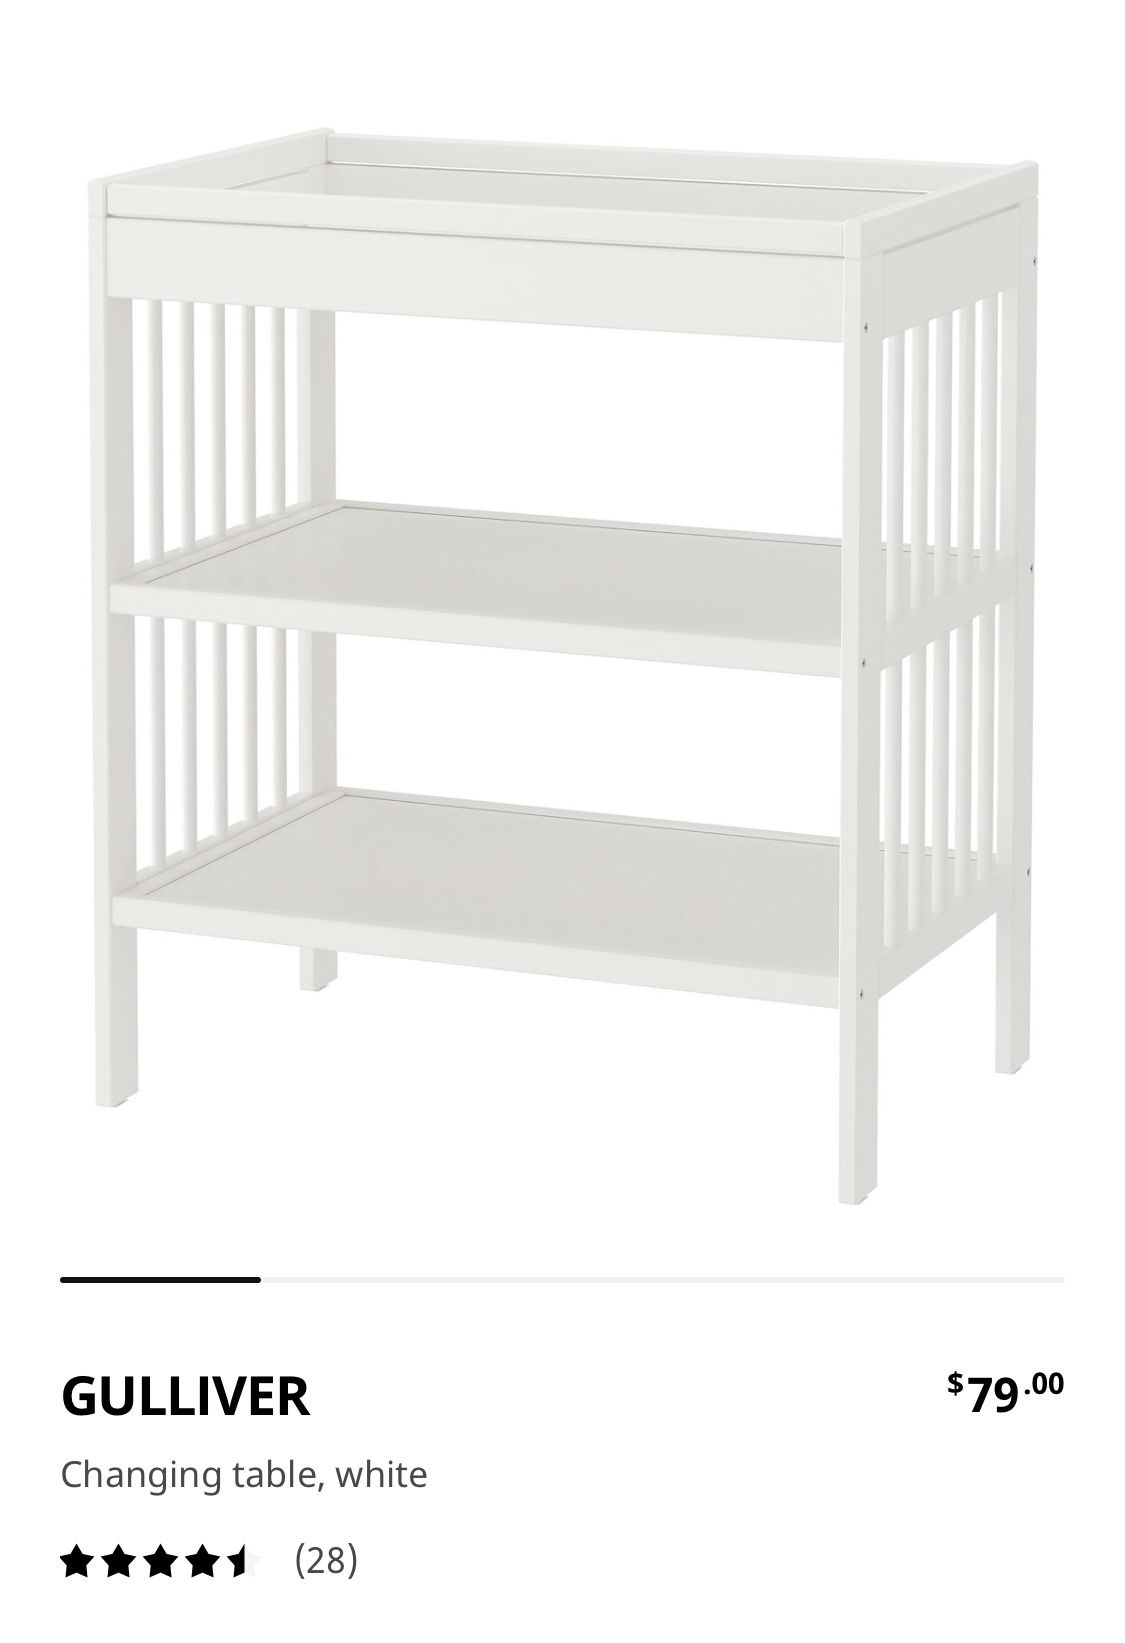 Changing table for baby